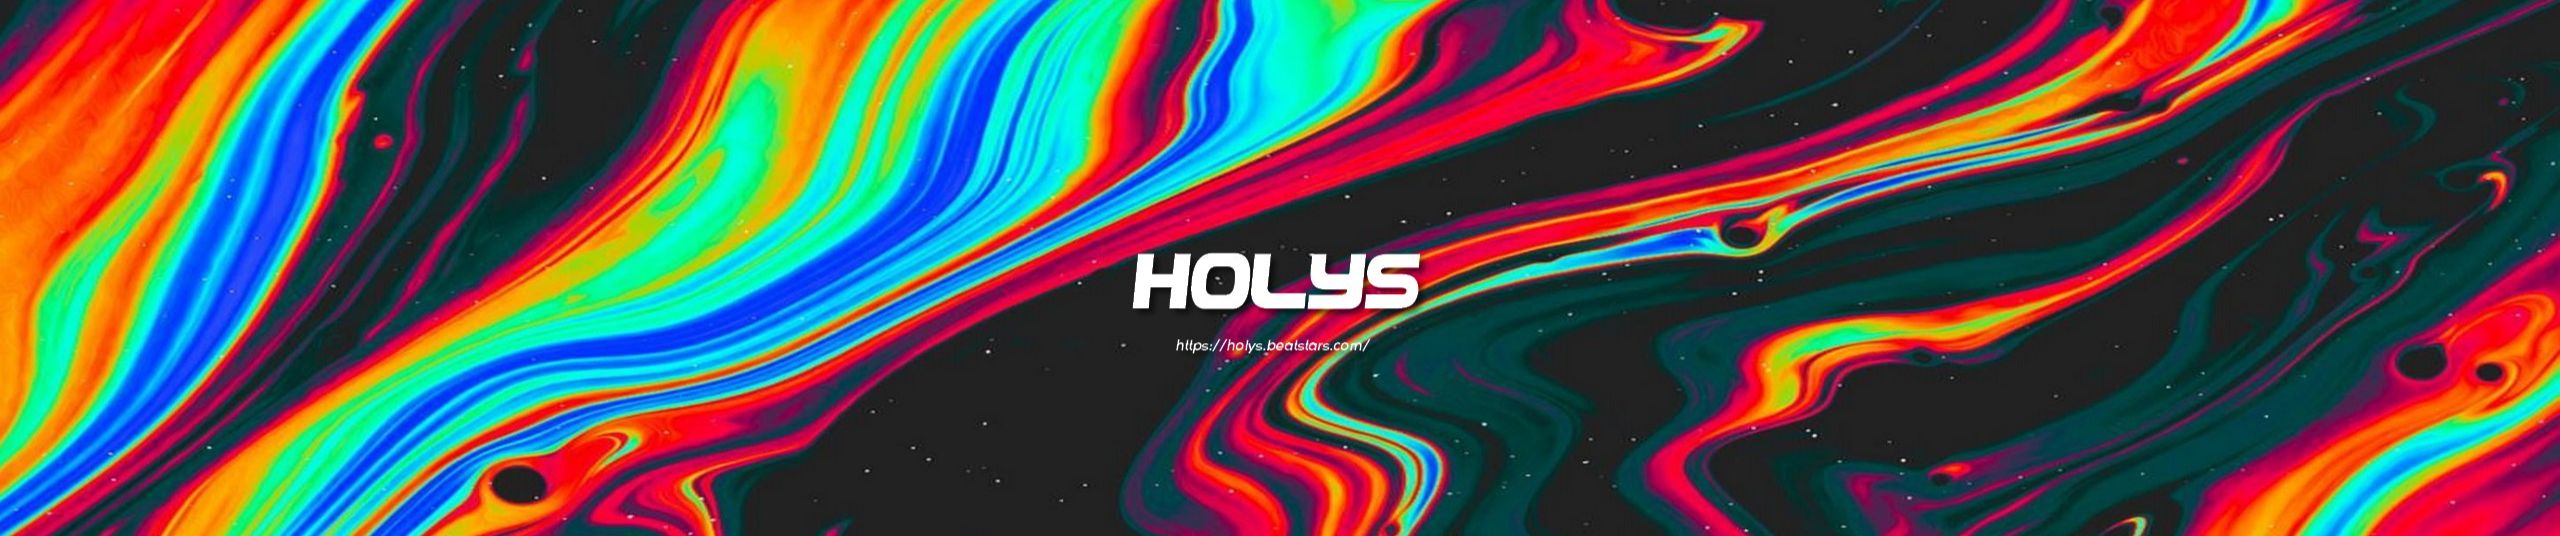 Stream Holls 🦋 music  Listen to songs, albums, playlists for free on  SoundCloud